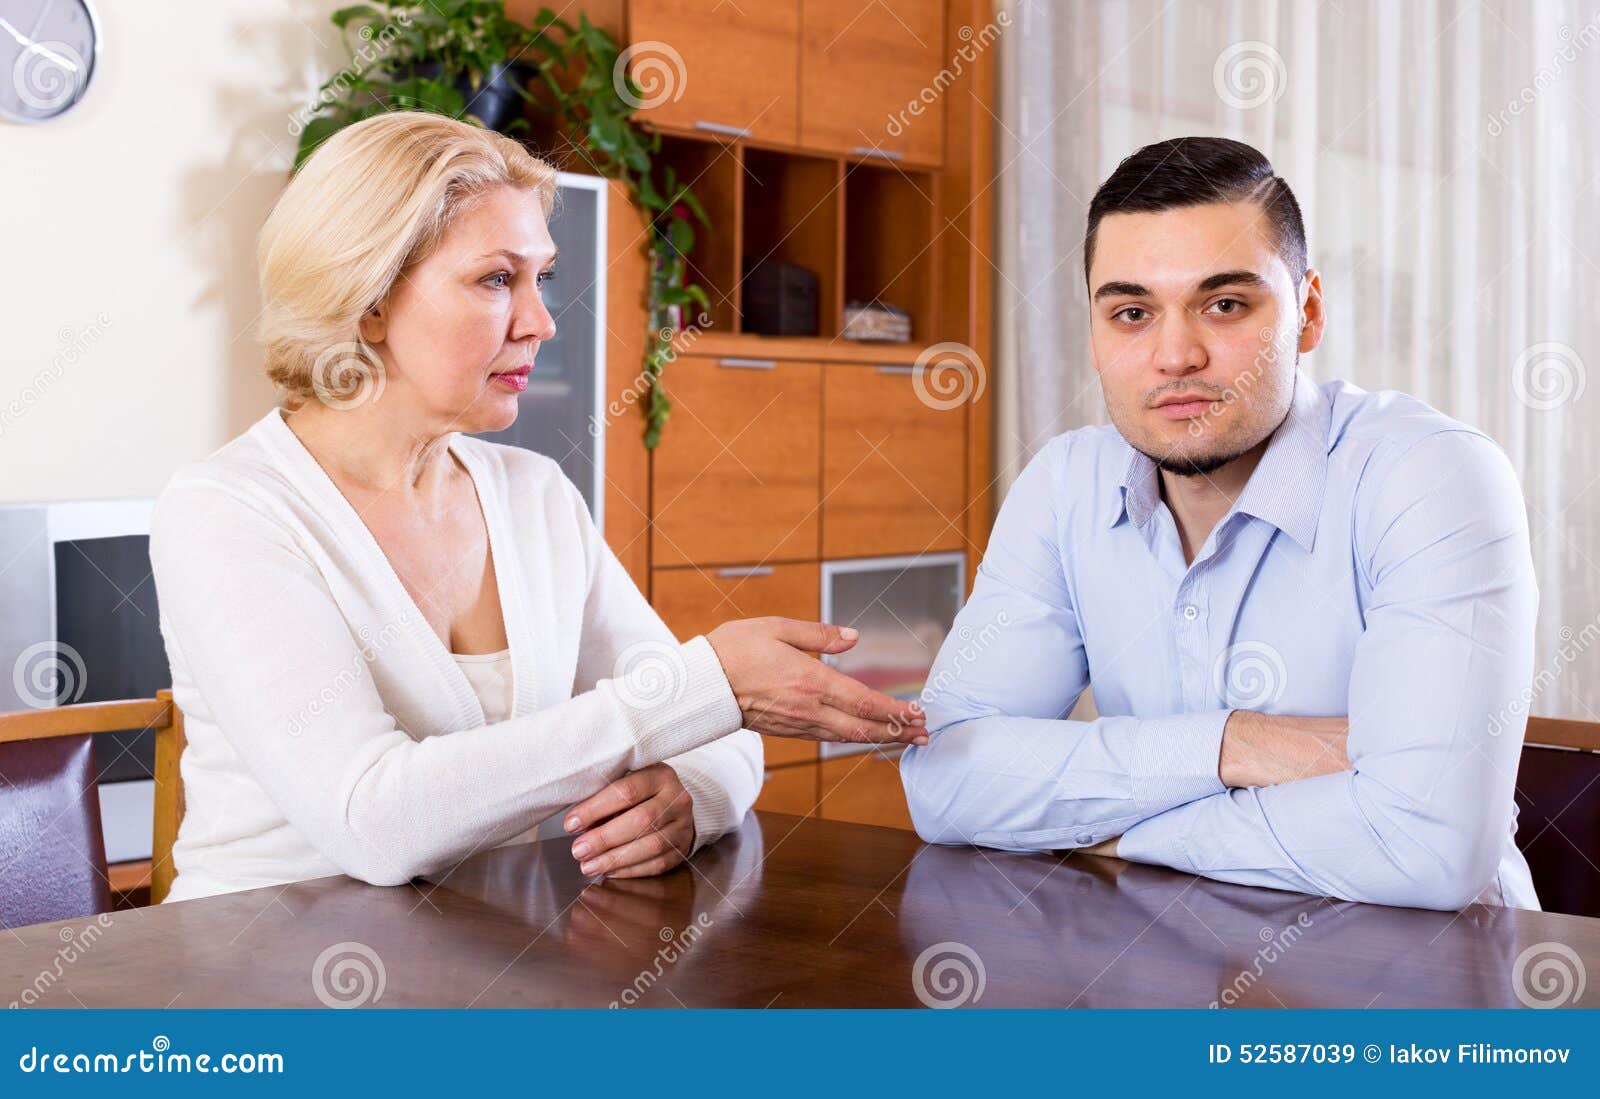 Young Man And Mature Girlfriend Stock Image Image Of Family